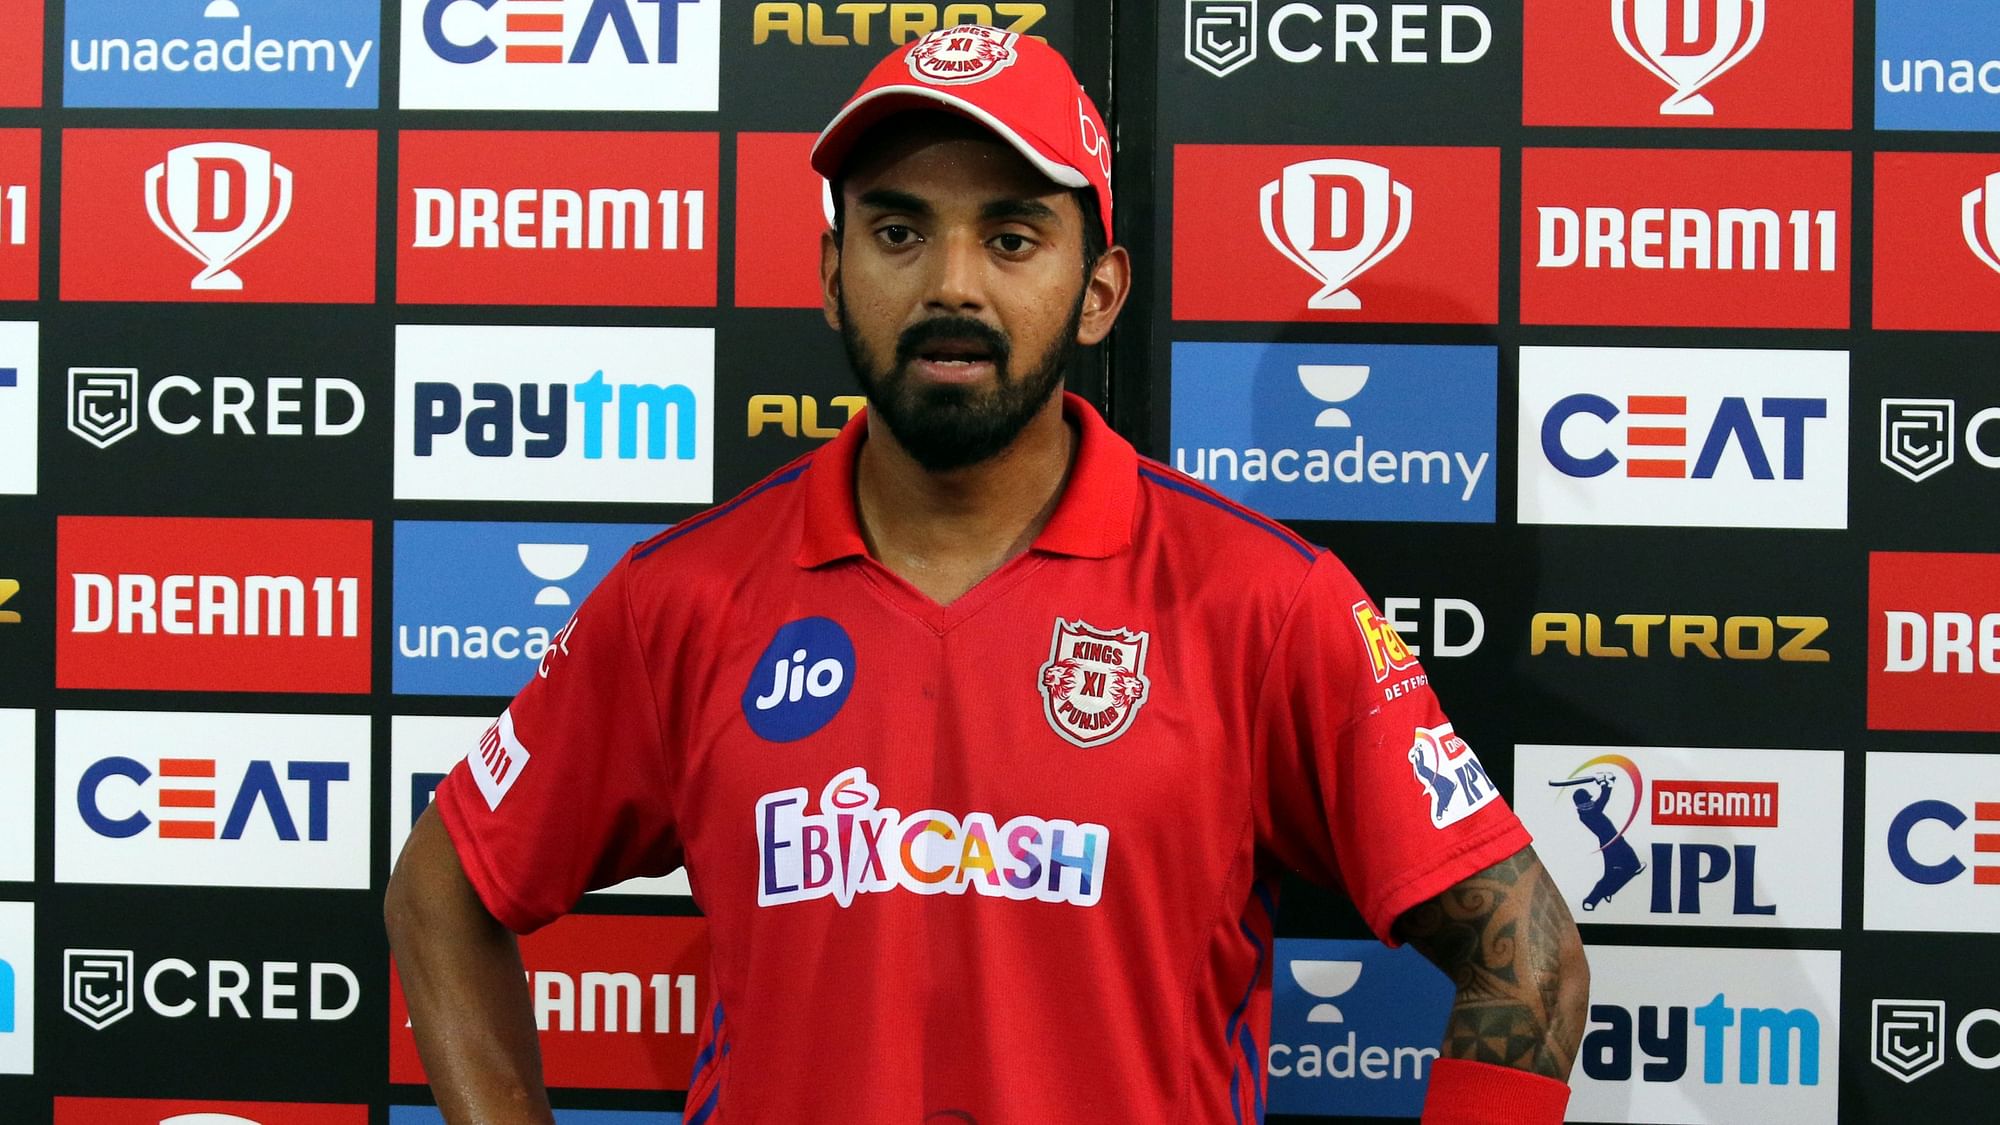 Kings XI Punjab (KXIP) captain KL Rahul said that he had no answers after the team succumbed to their fifth consecutive loss.